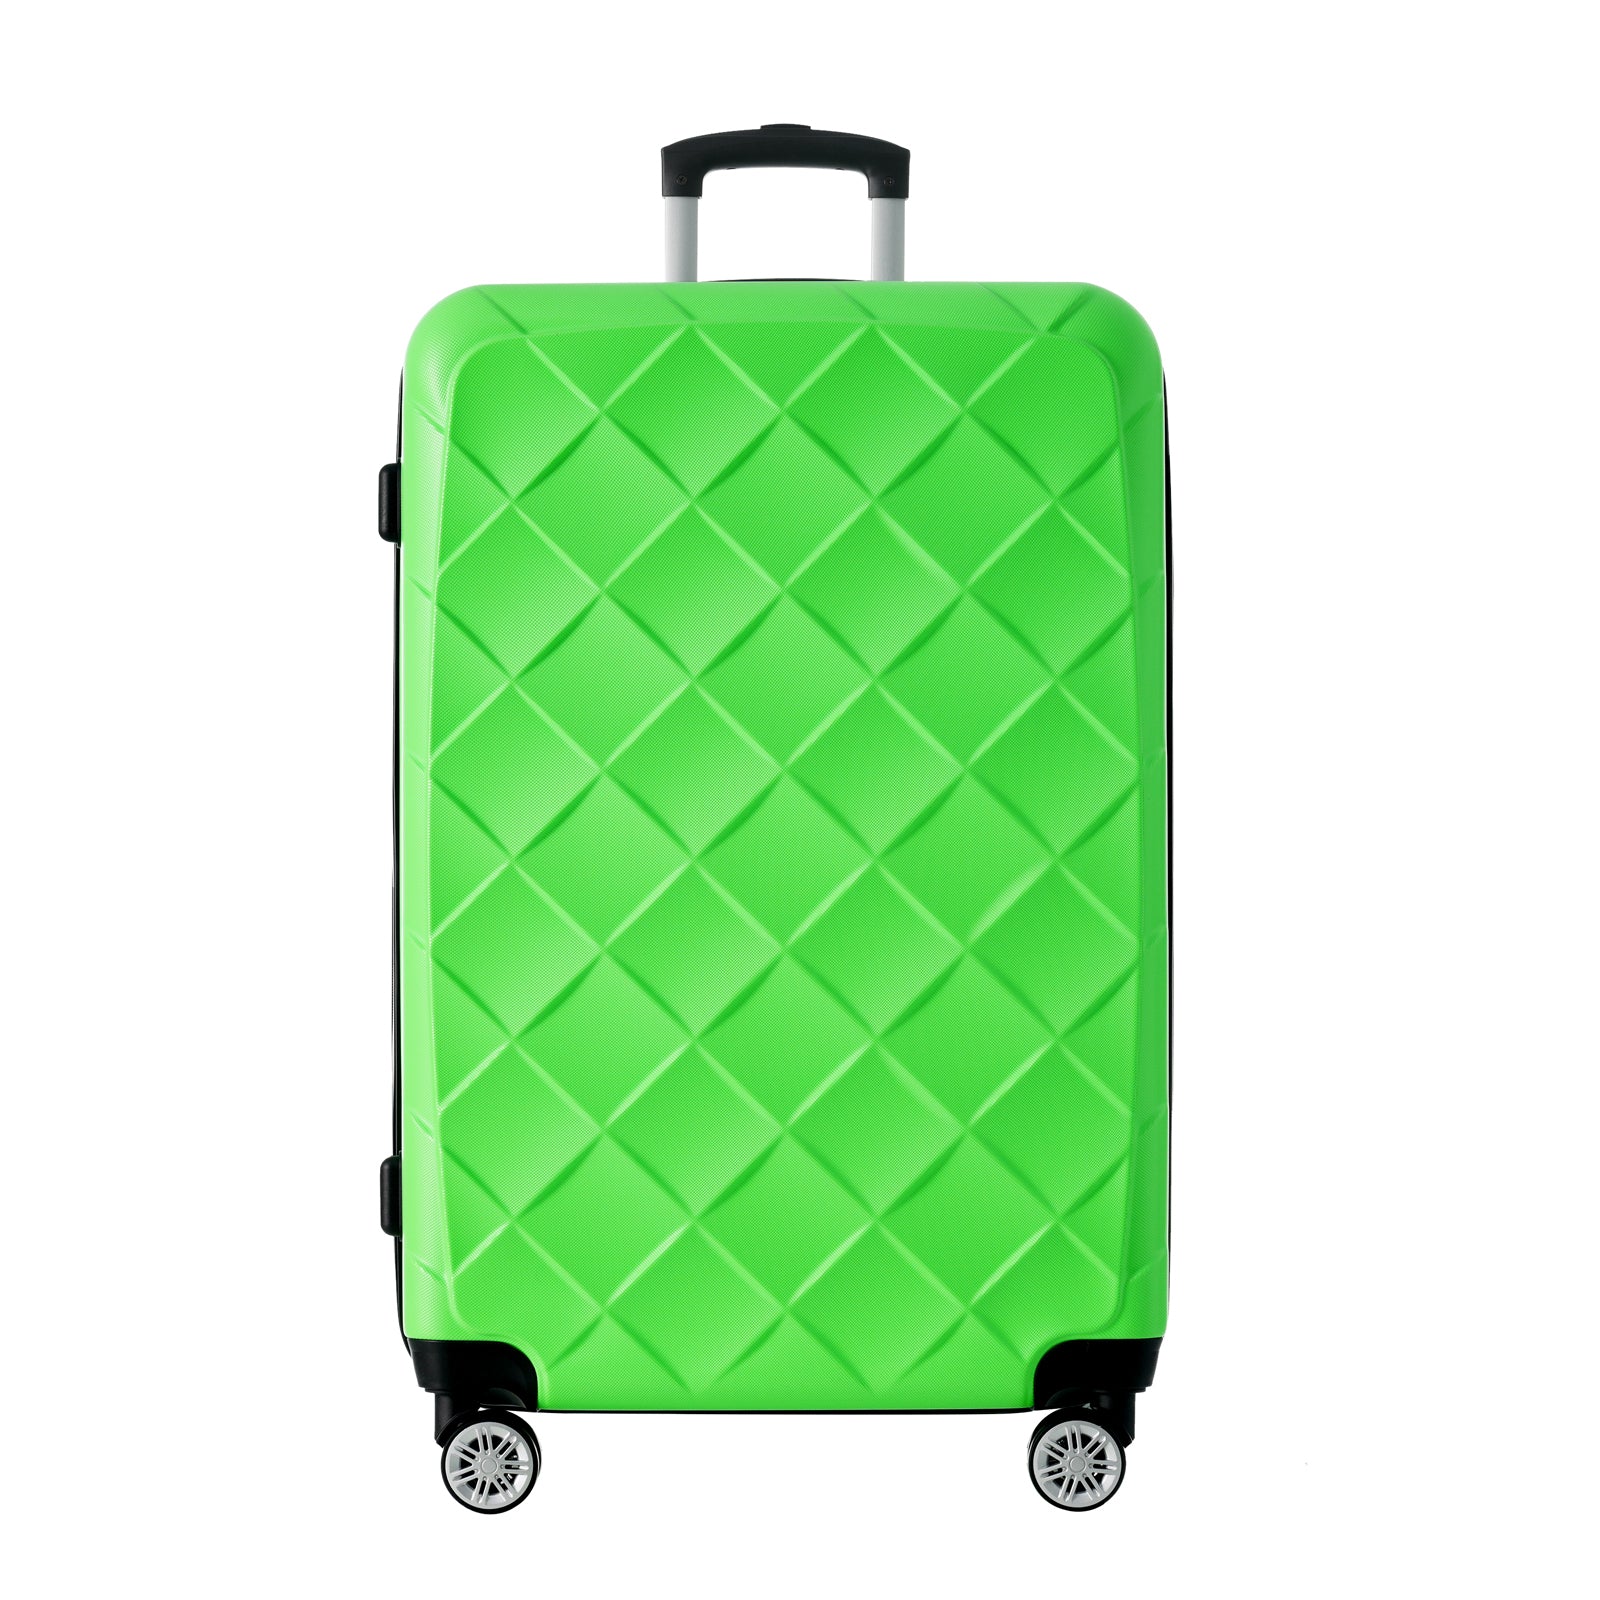 3 Piece Luggage Set Suitcase Set, ABS Hard Shell green-abs